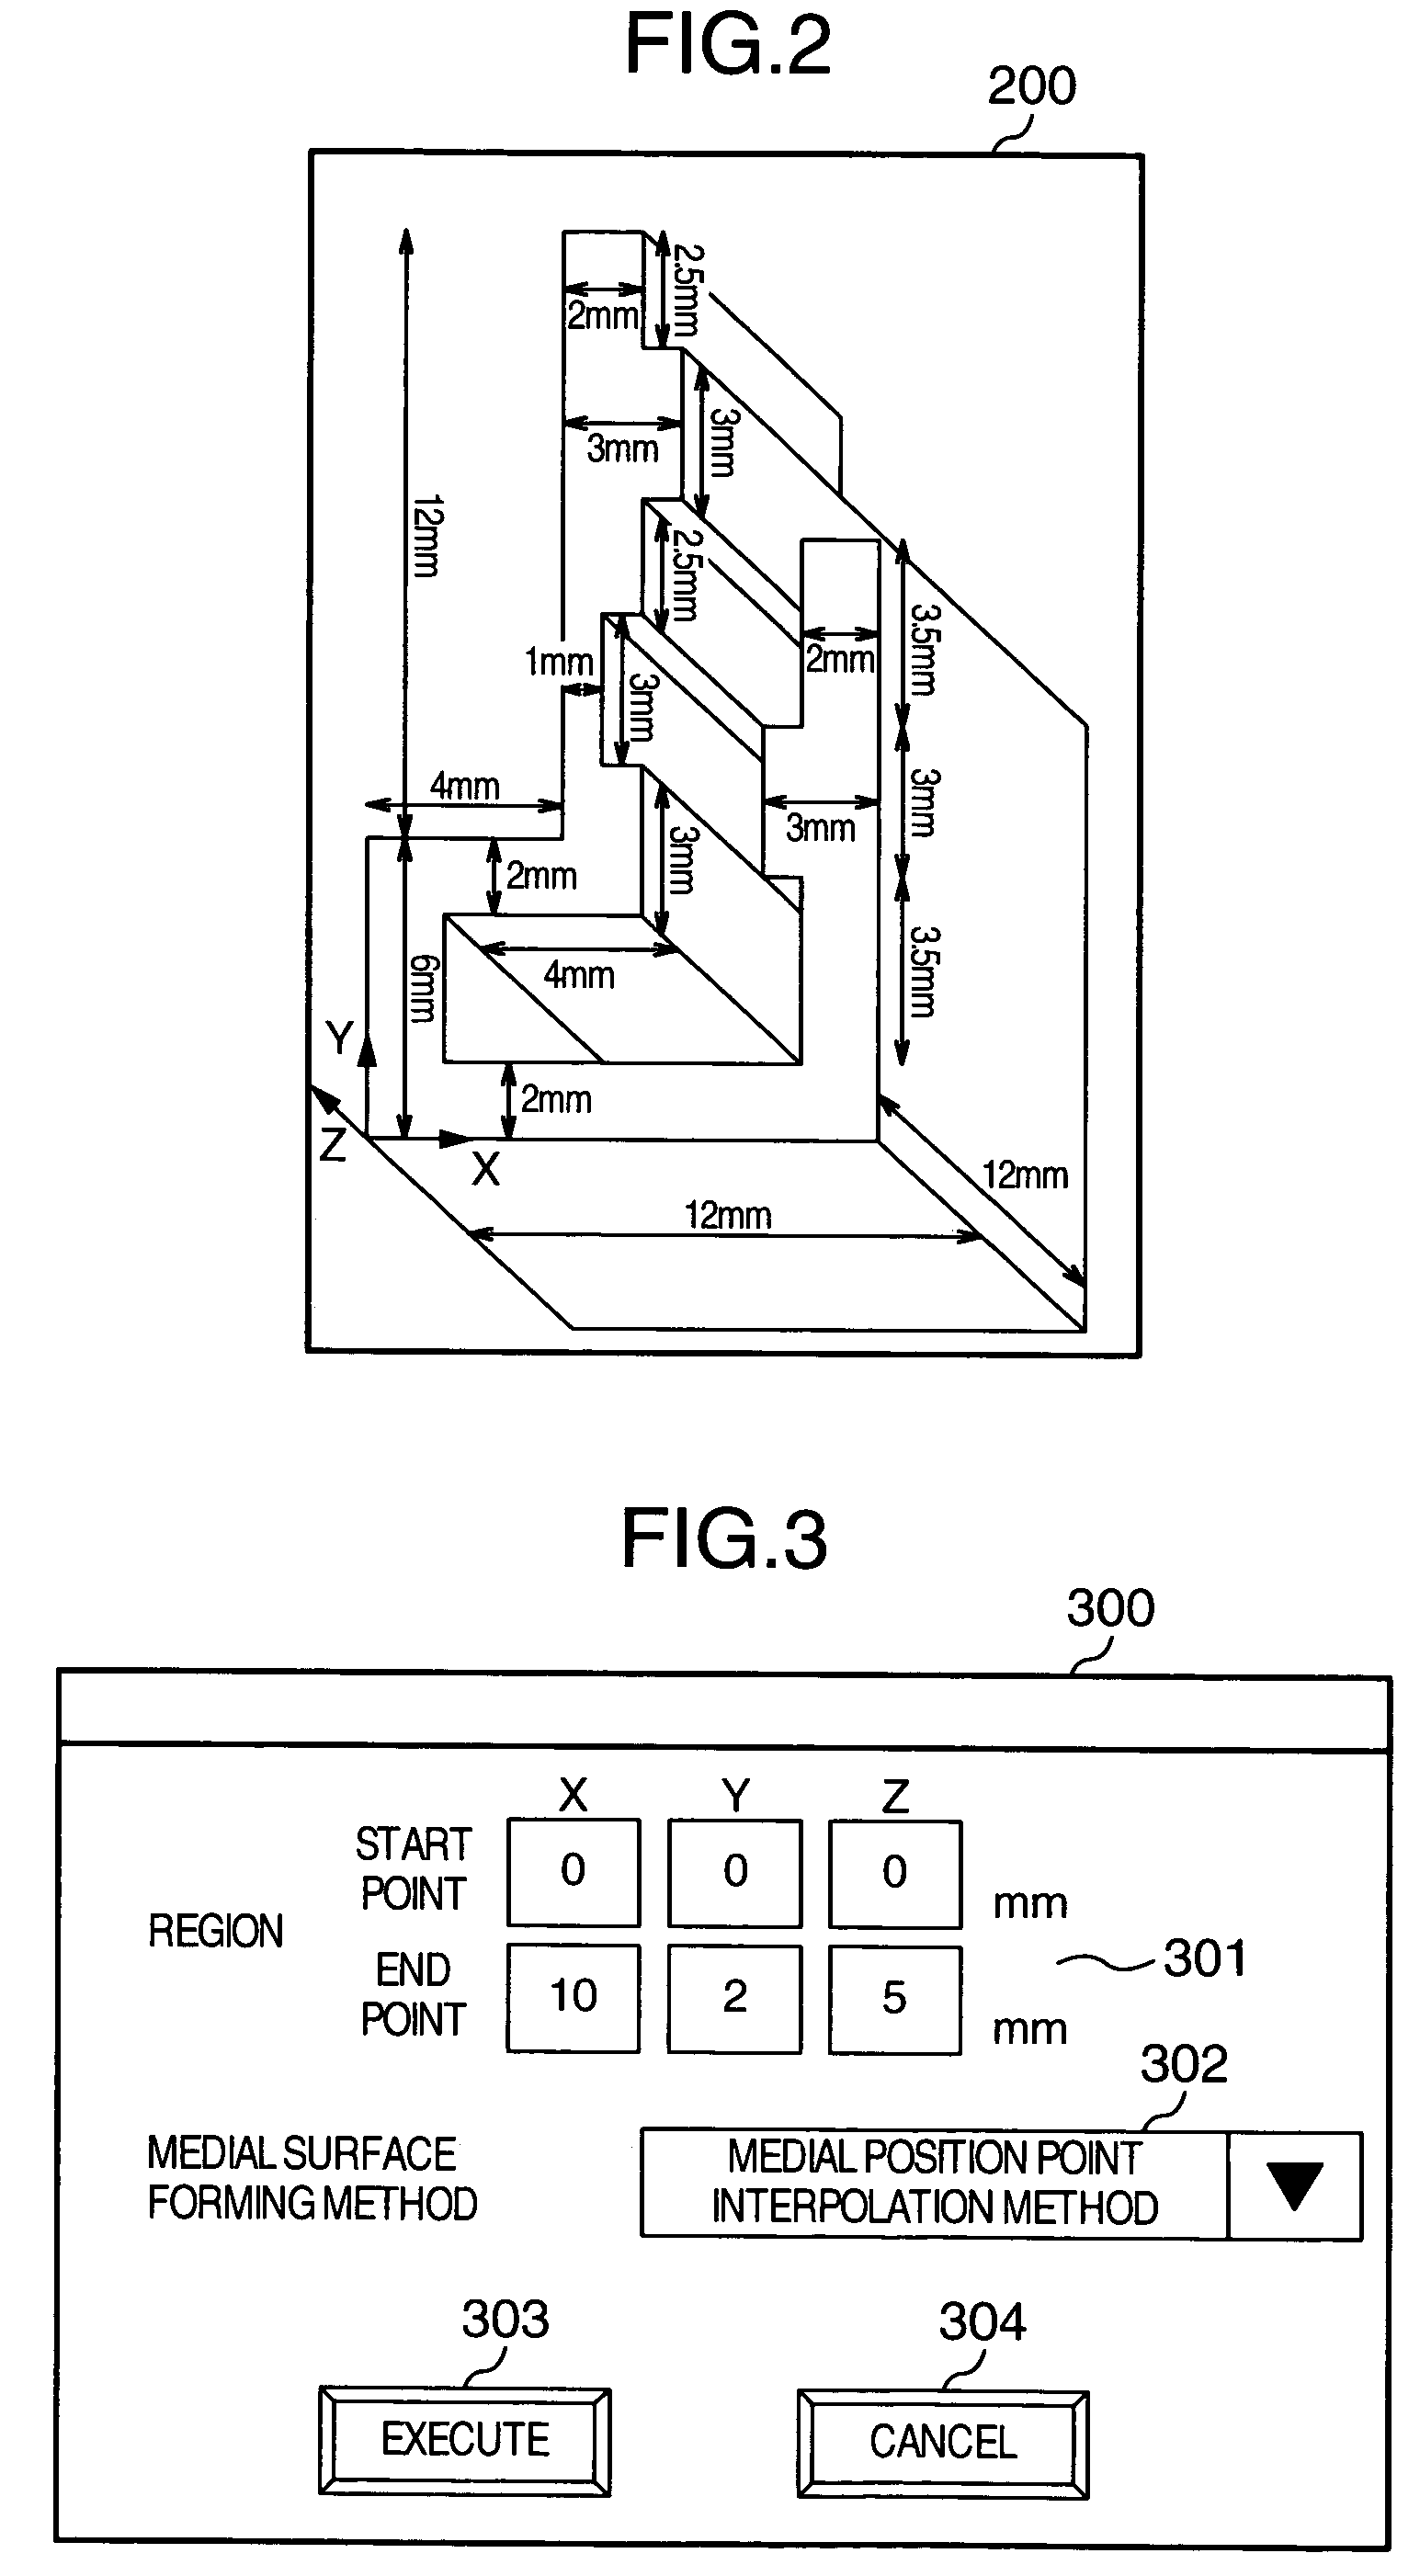 Analytical shell model forming apparatus